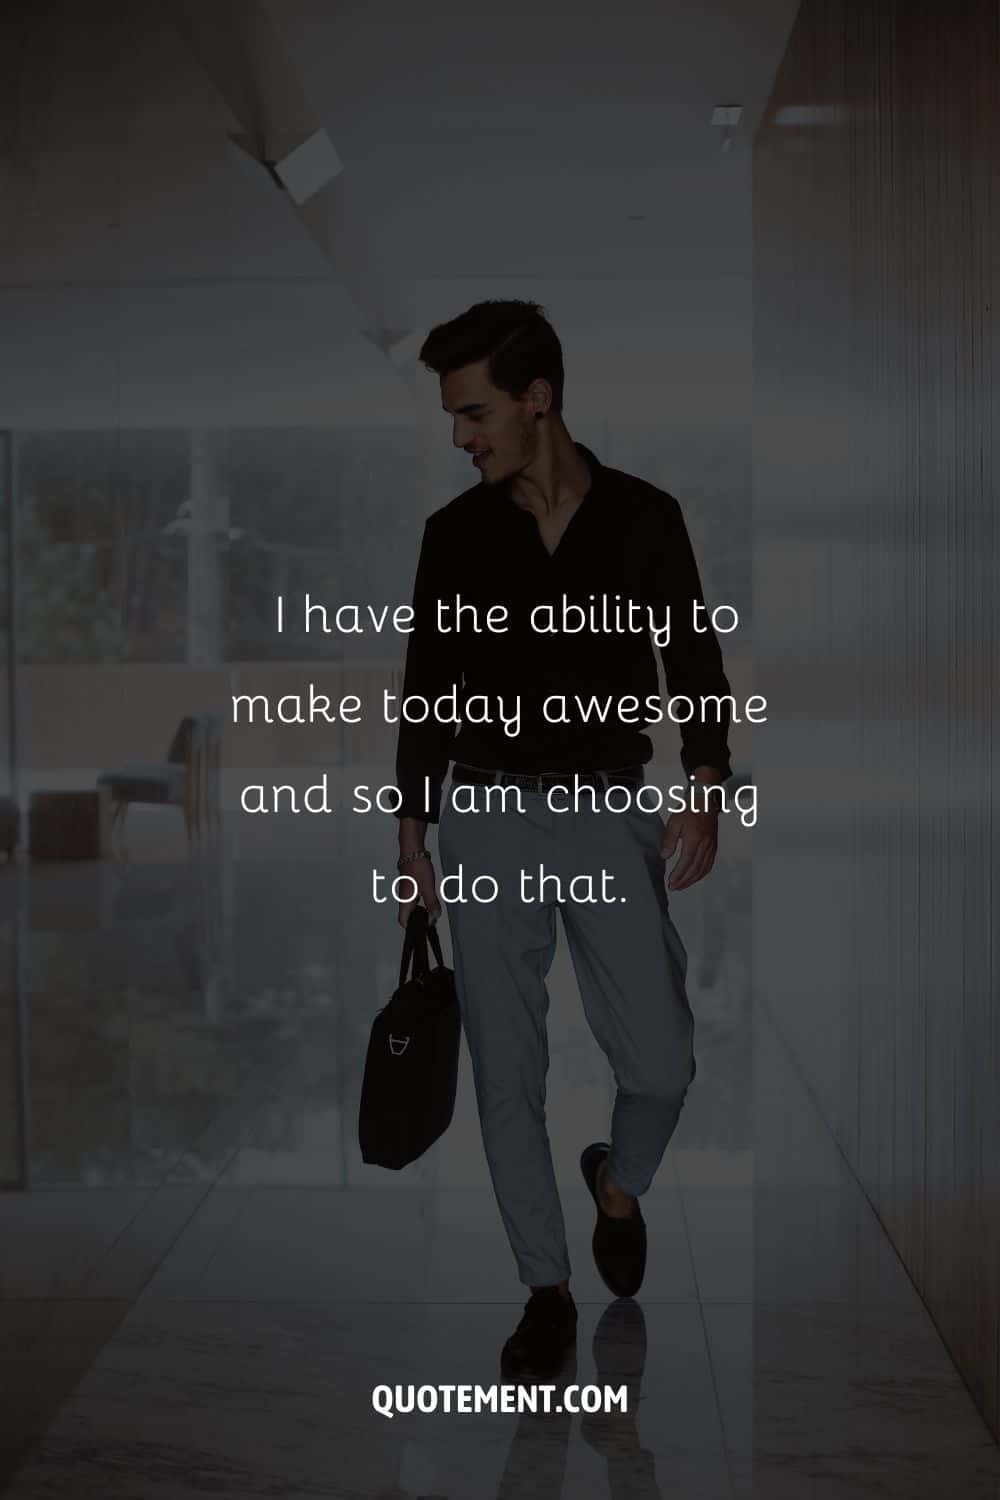 Image of a guy wearing formal clothes representing Friday confidence affirmation.